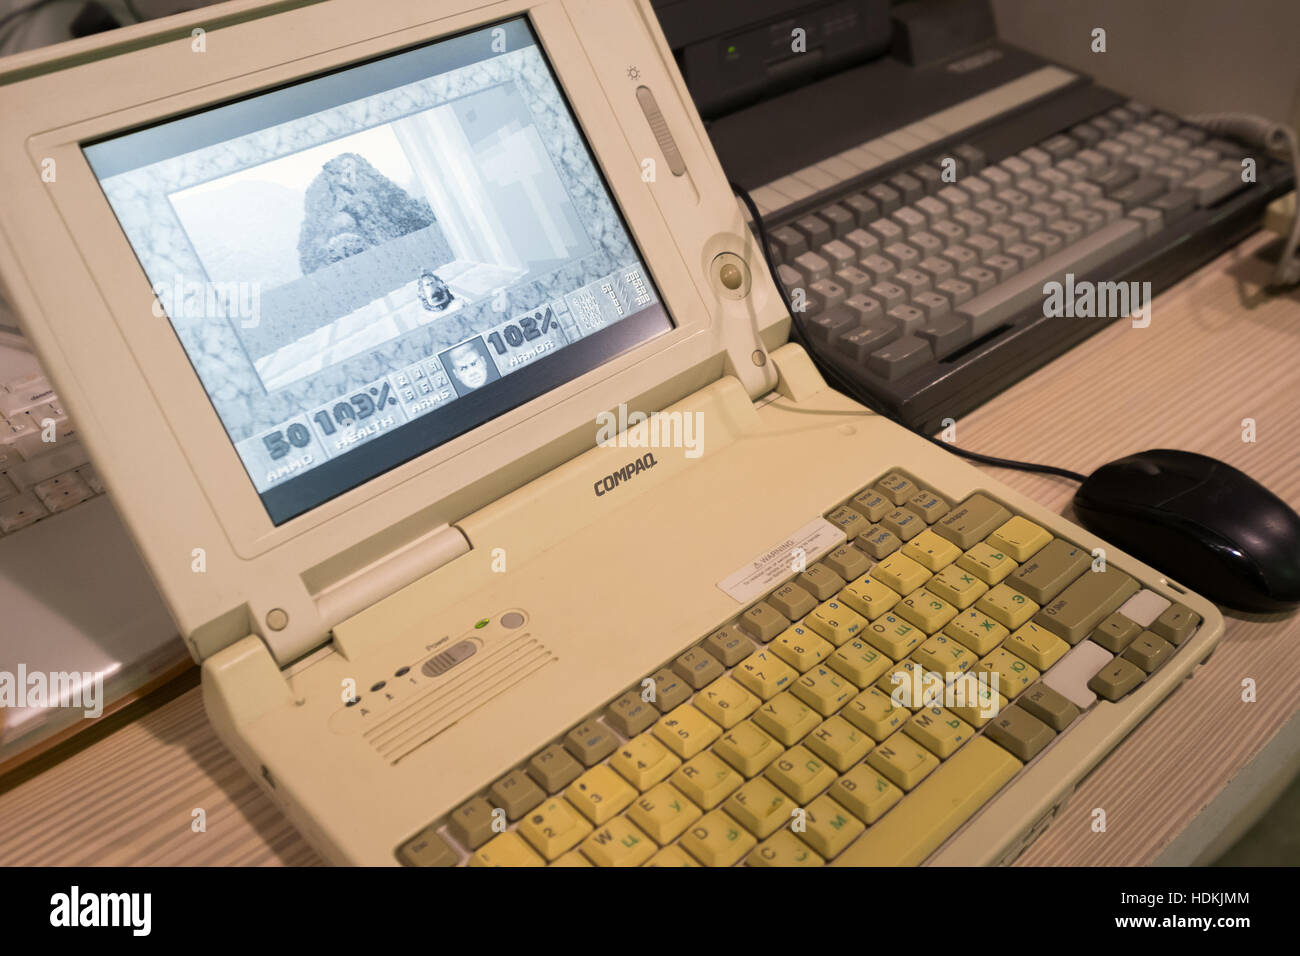 Working retro pc and laptops with vintage games Stock Photo - Alamy